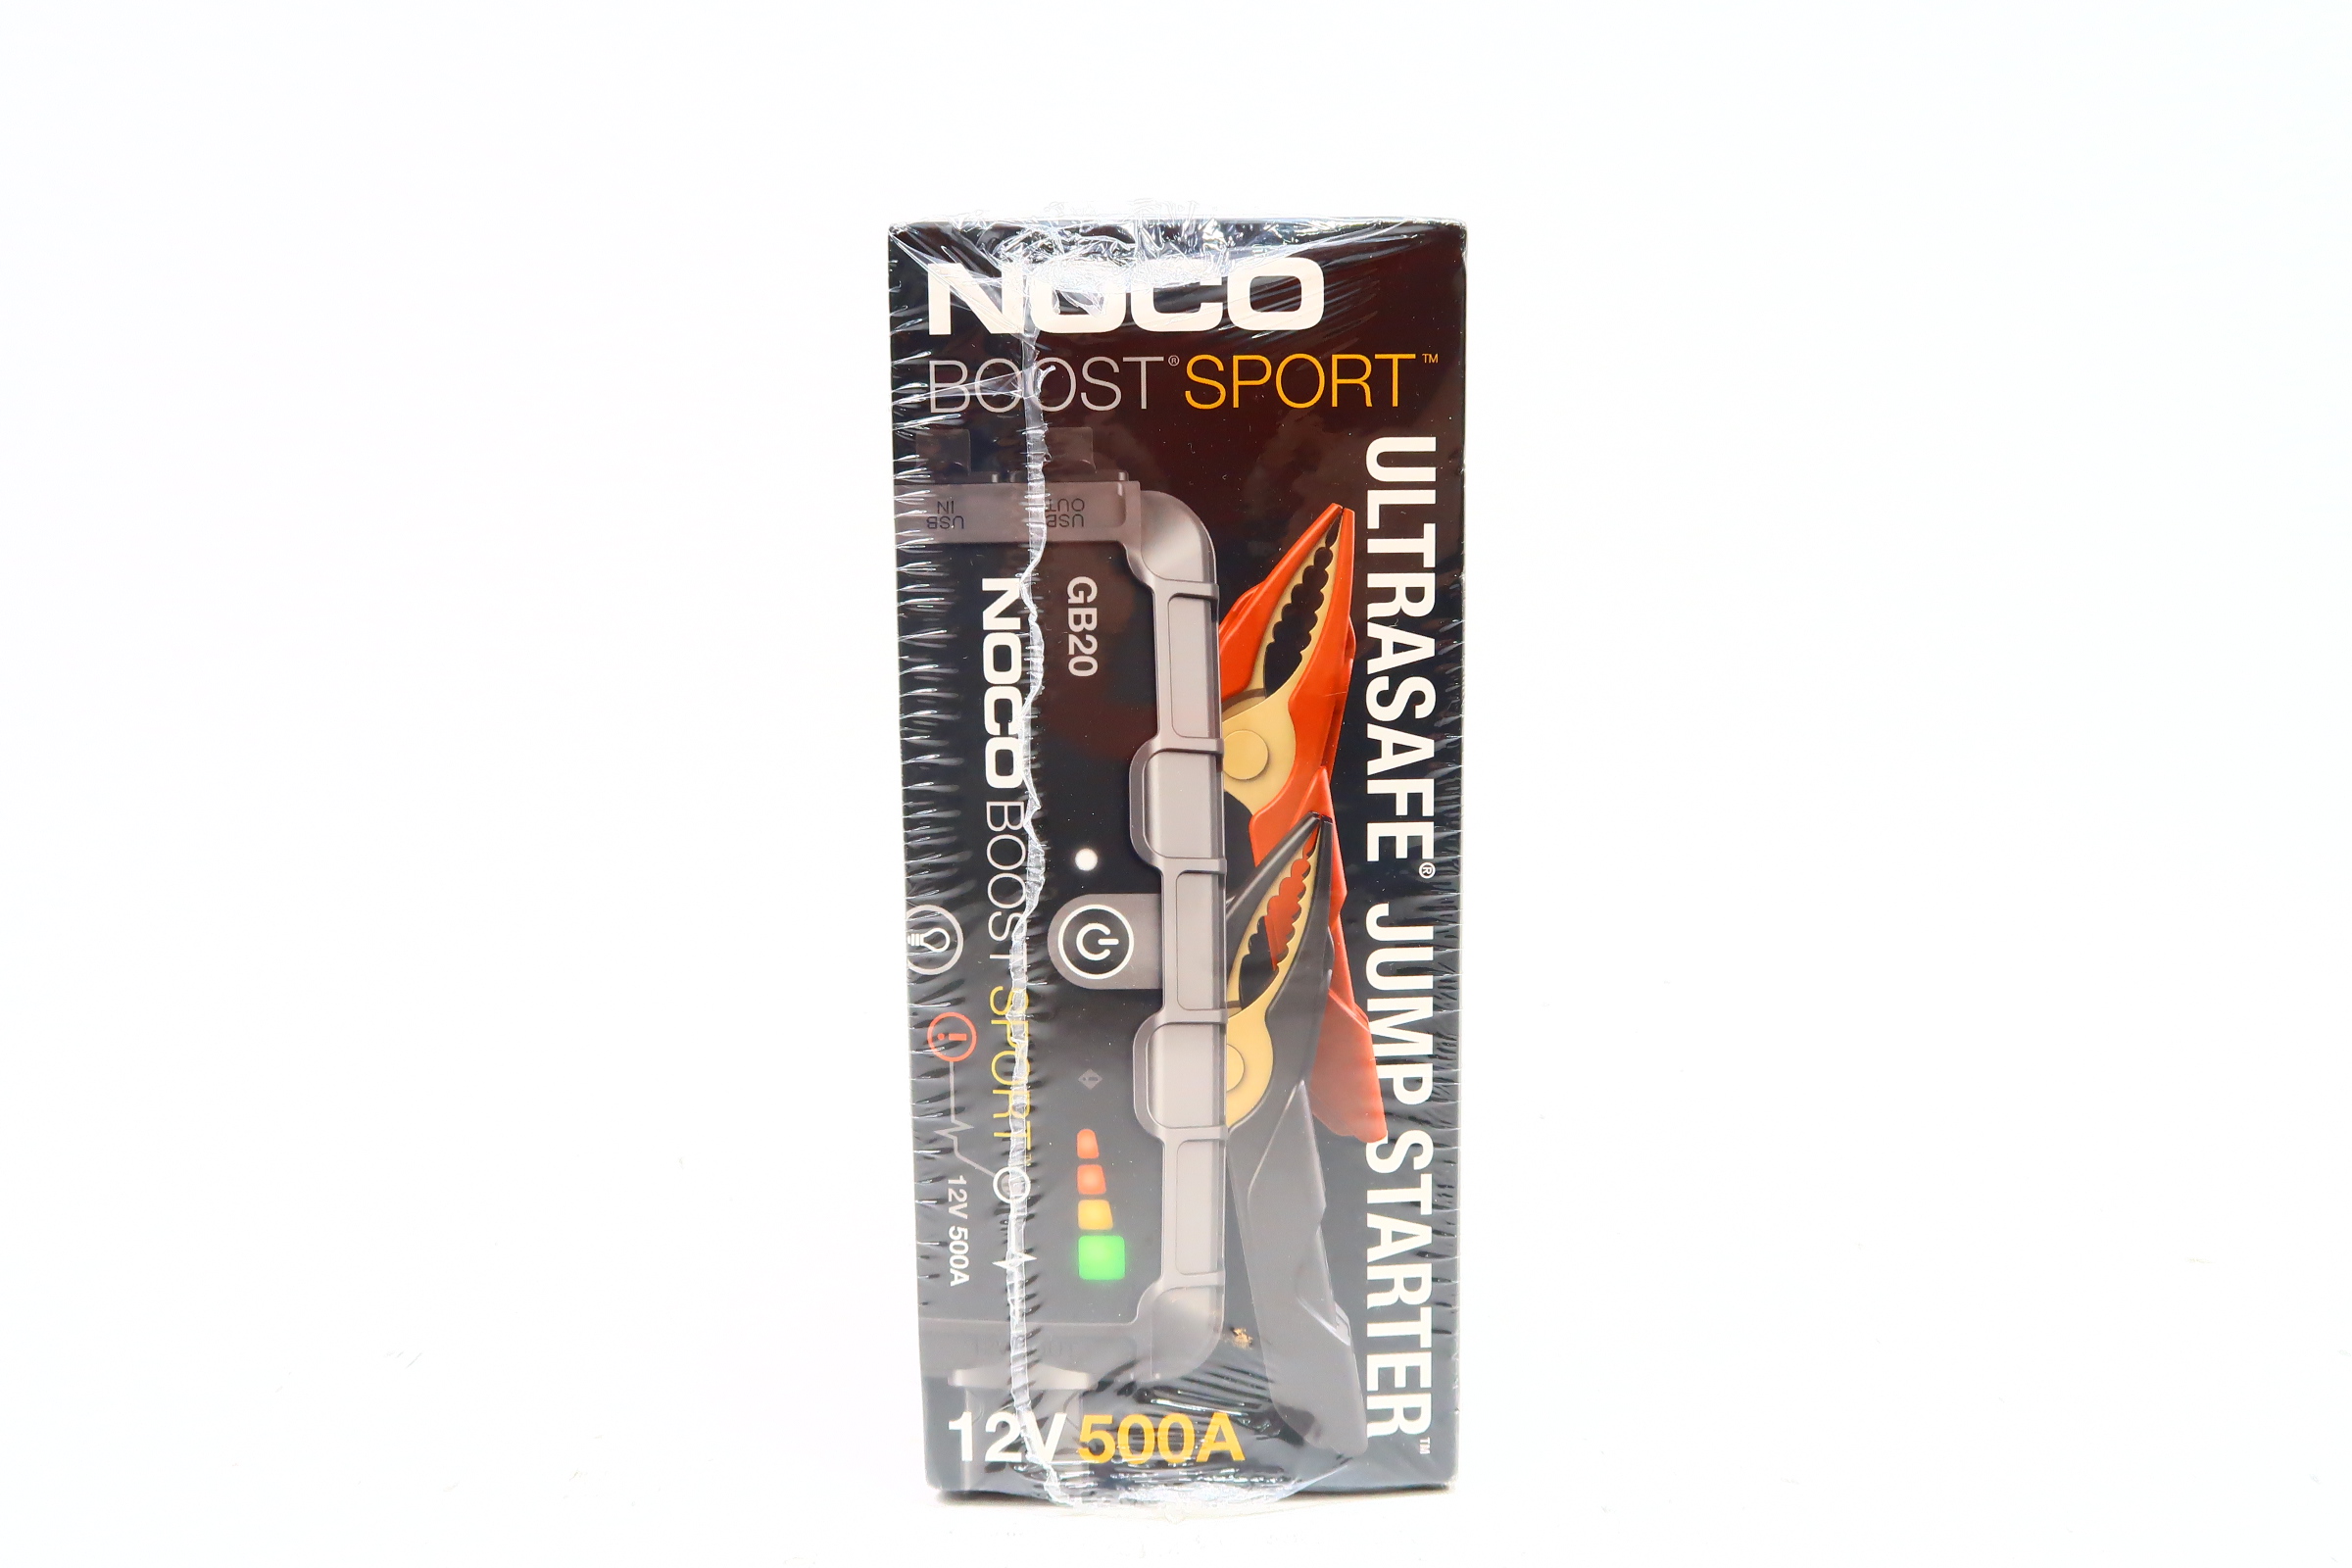 NOCO Boost Sport 500A UltraSafe Lithium Jump Starter GB20 - Now 15